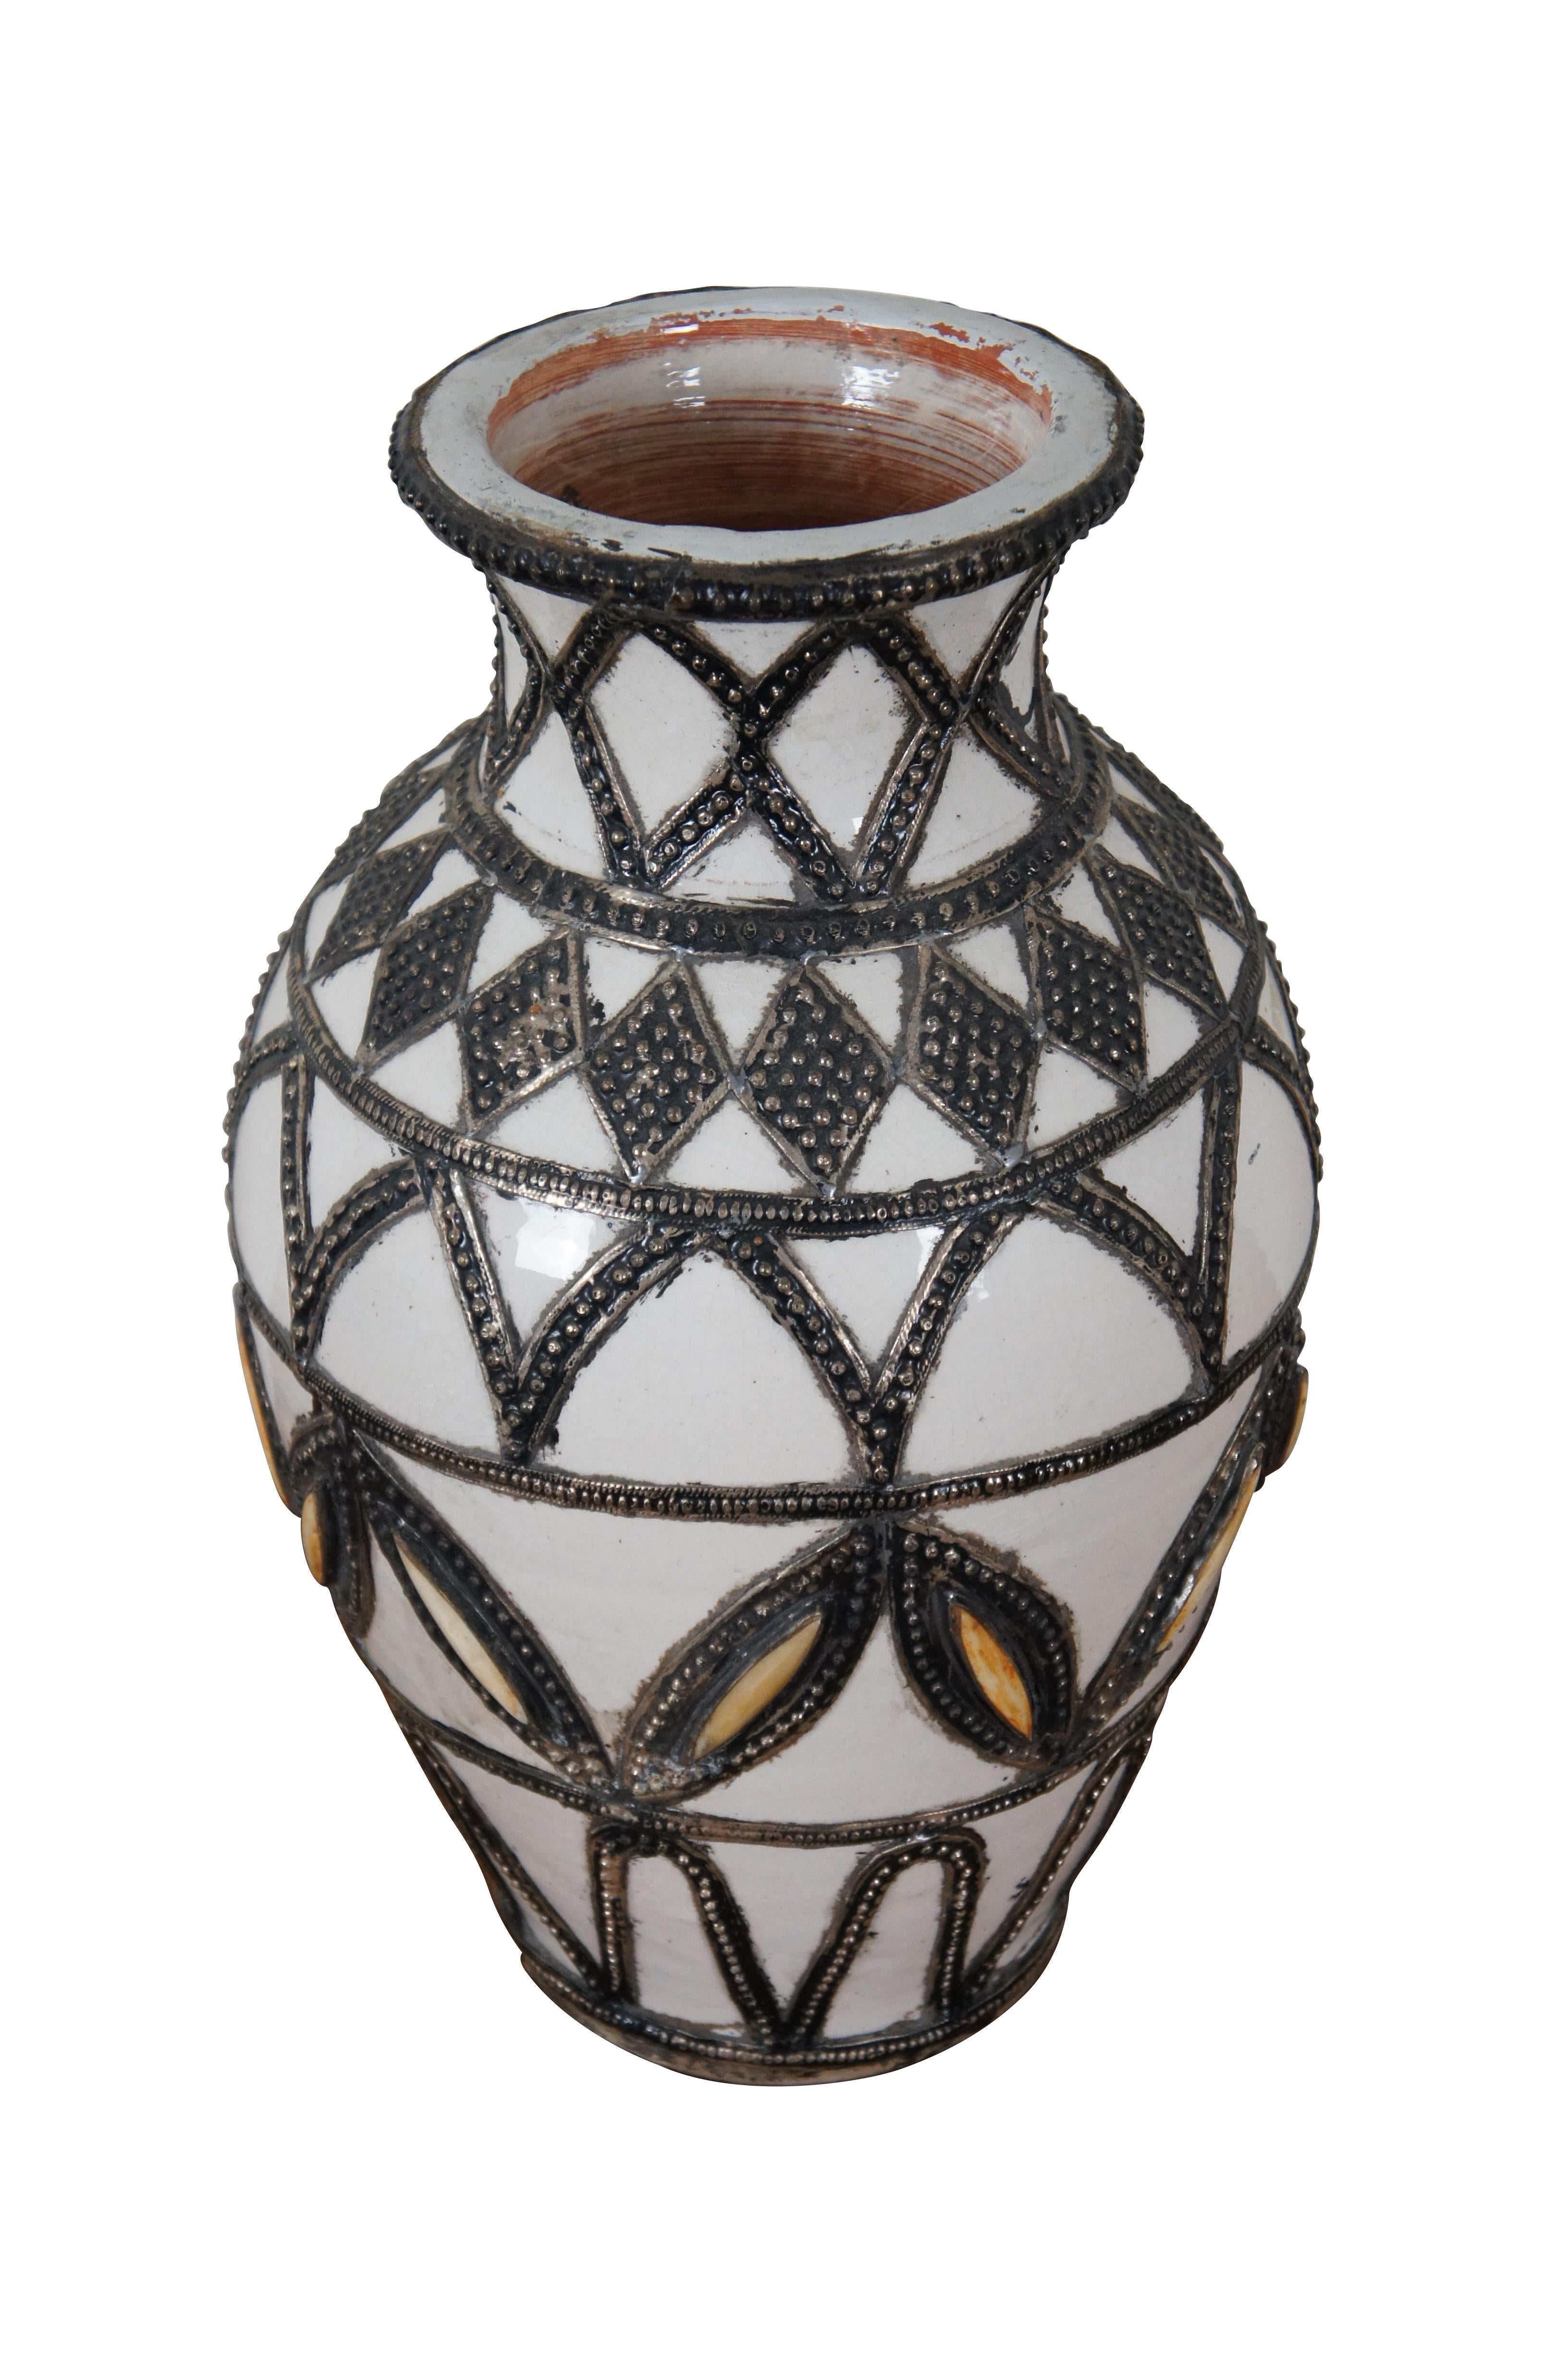 A large and impressive Moroccan ceramic vase, glazed in white with a variety of geometric inlaid studded nickel-silver designs.

Dimensions:
10” x 16.5” (Diameter x Height)